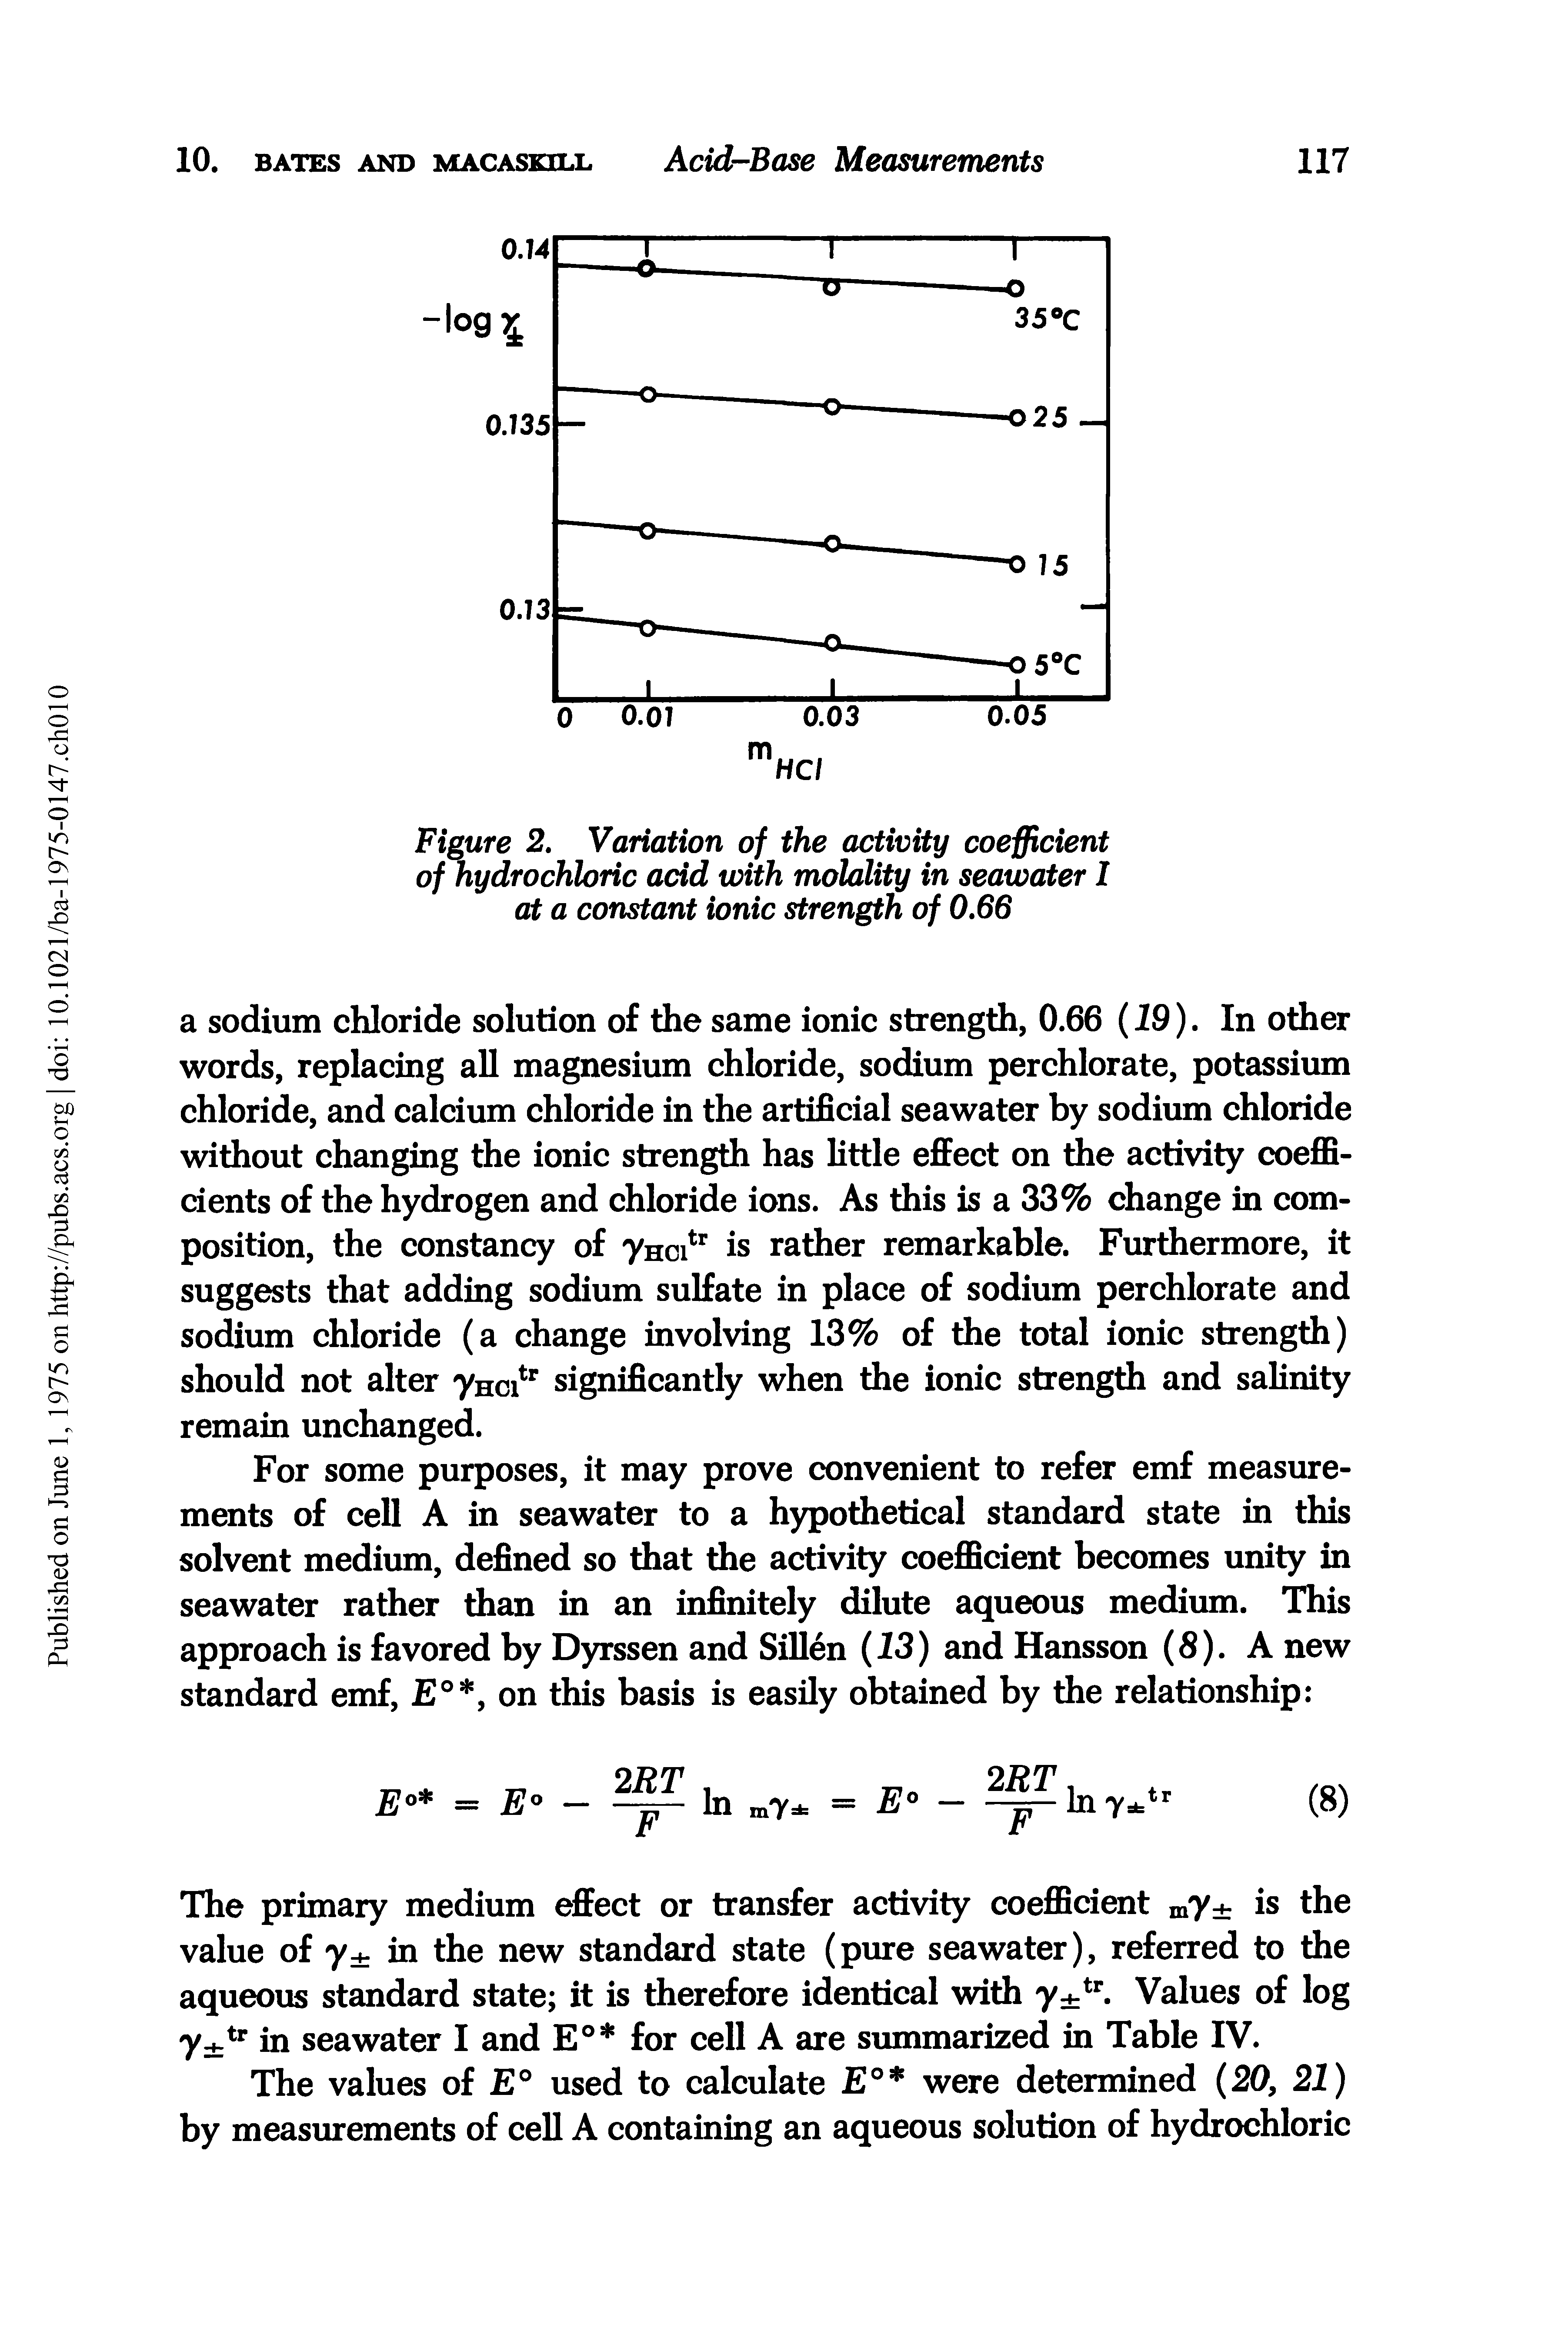 Figure 2. Variation of the activity coefficient of hydrochloric acid with molality in seawater I at a constant ionic strength of 0.66...